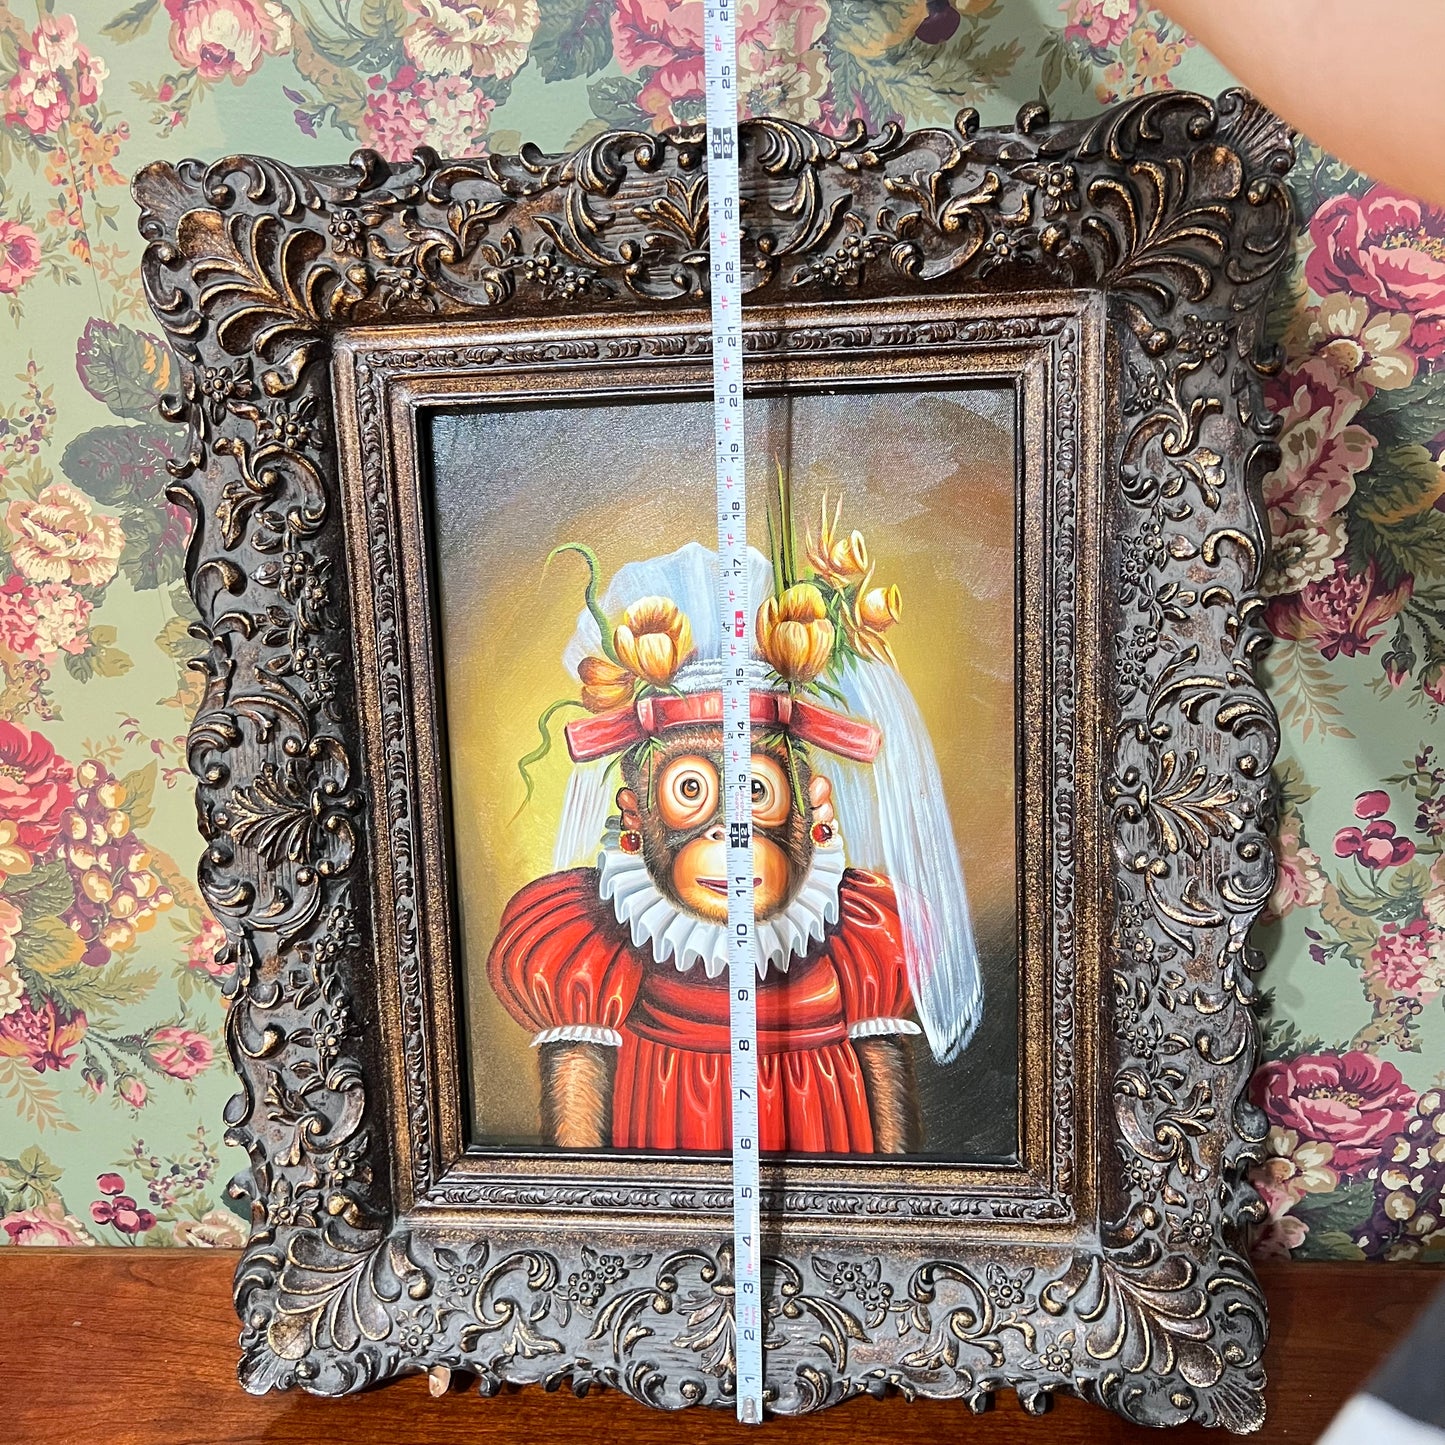 Fabulous Art Bride Monkey Painting With Ornate Wooden Frame 24.5x20.5